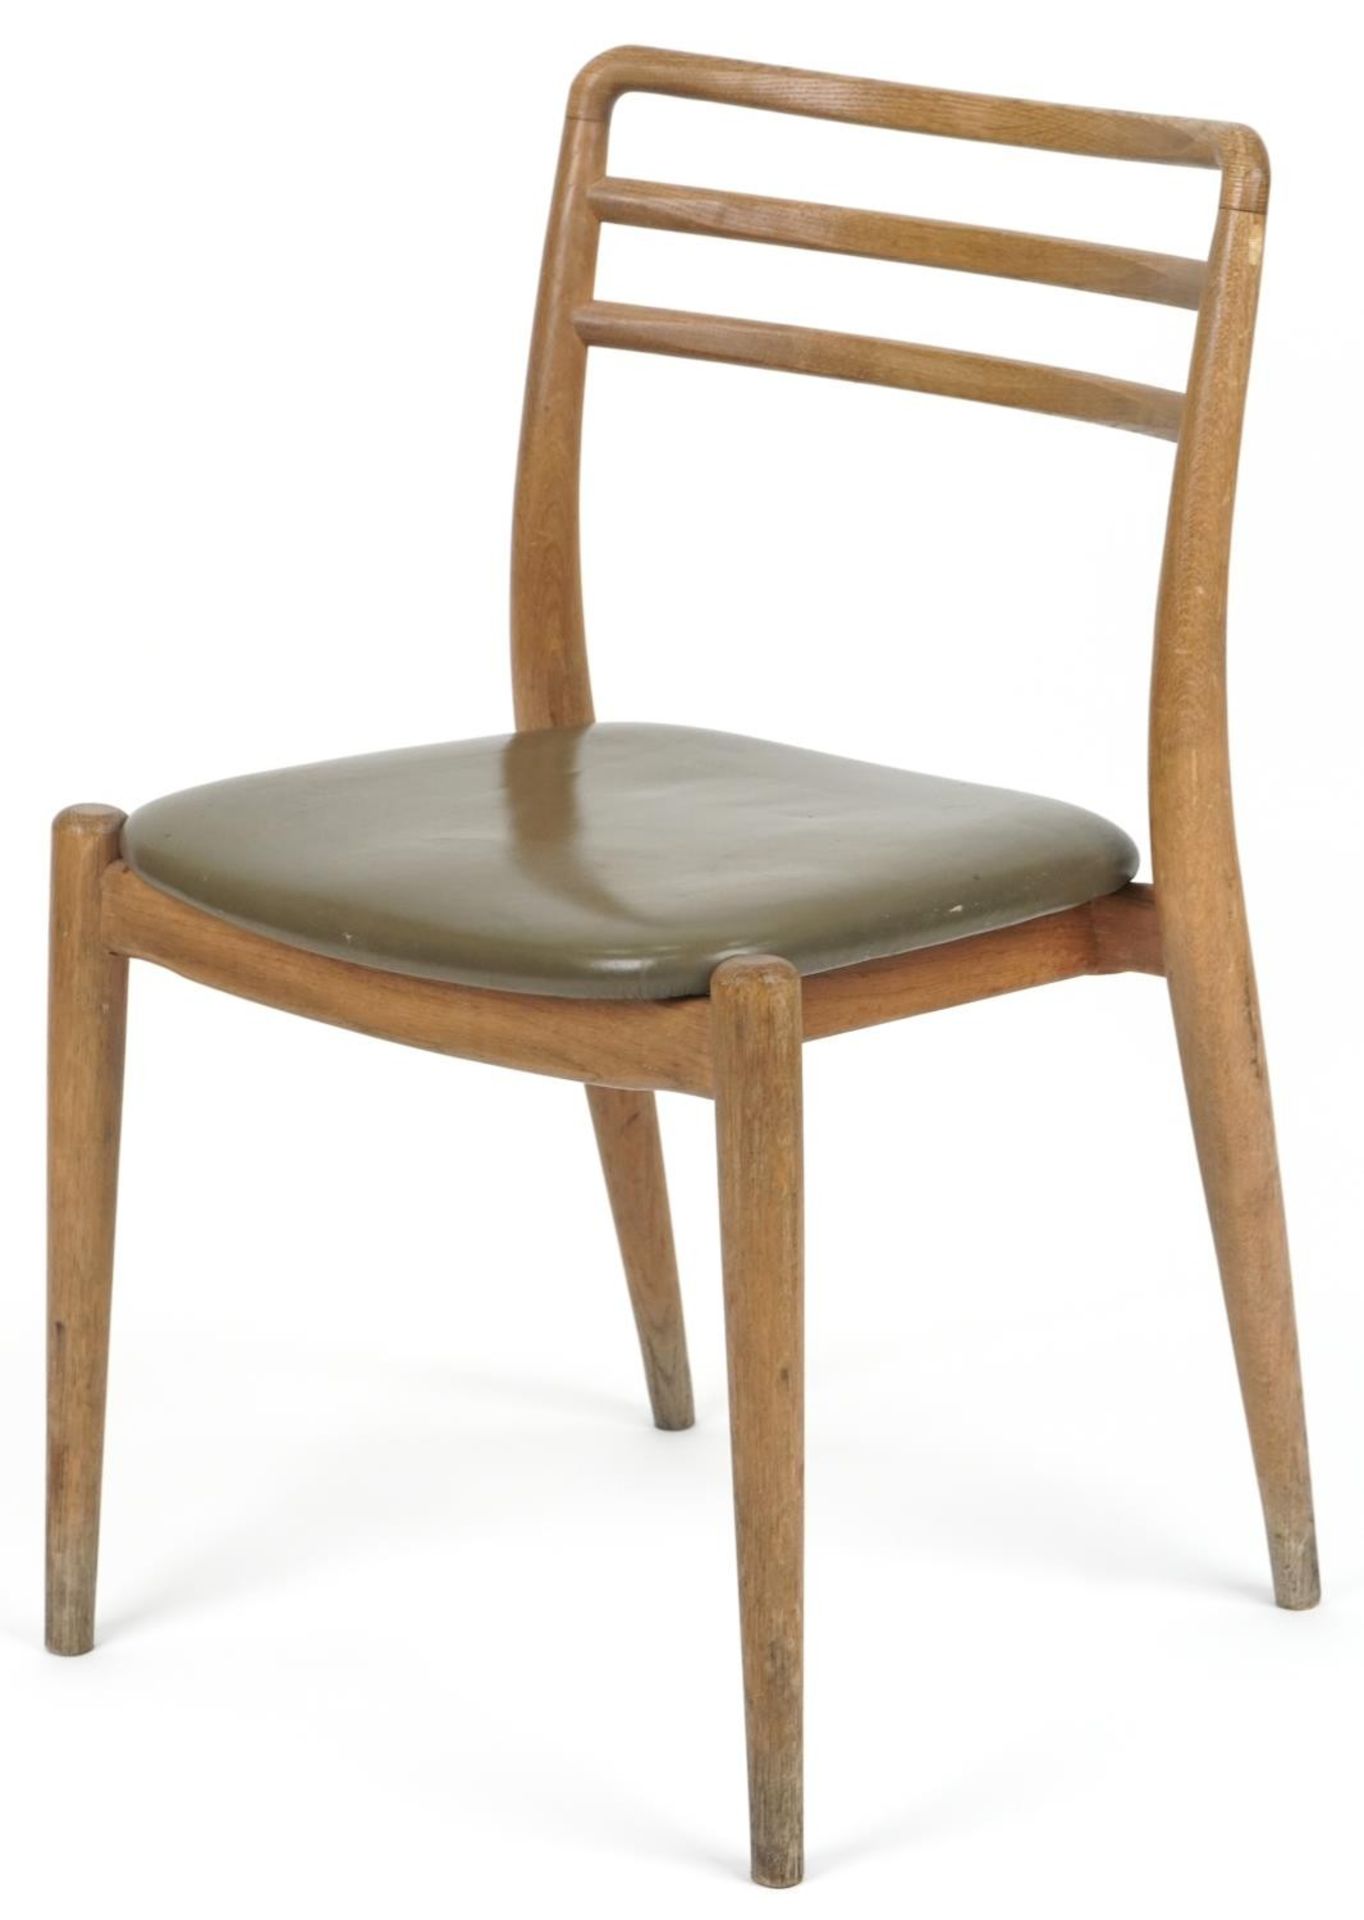 Scandinavian design teak chair with leather upholstered seat, 75cm high